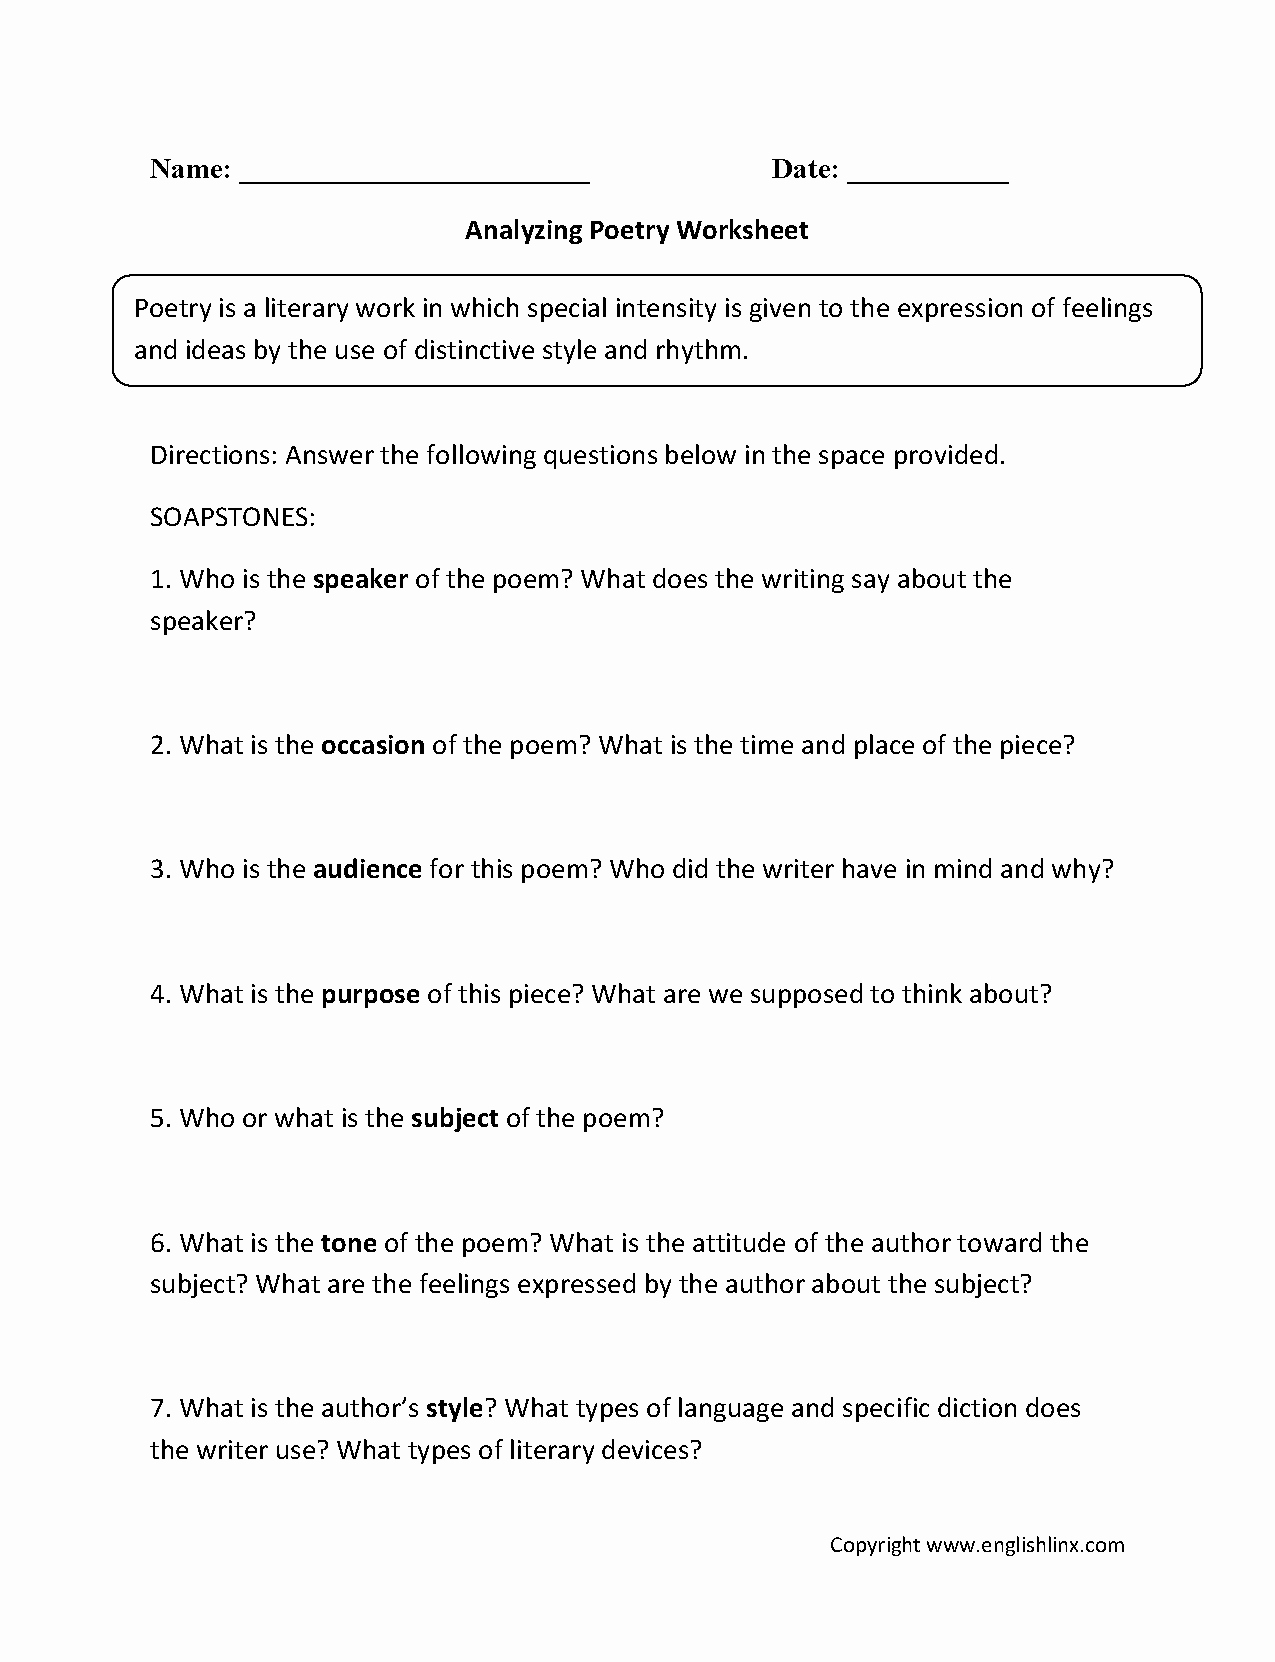 Sound Devices In Poetry Worksheet Luxury Analyzing Poems